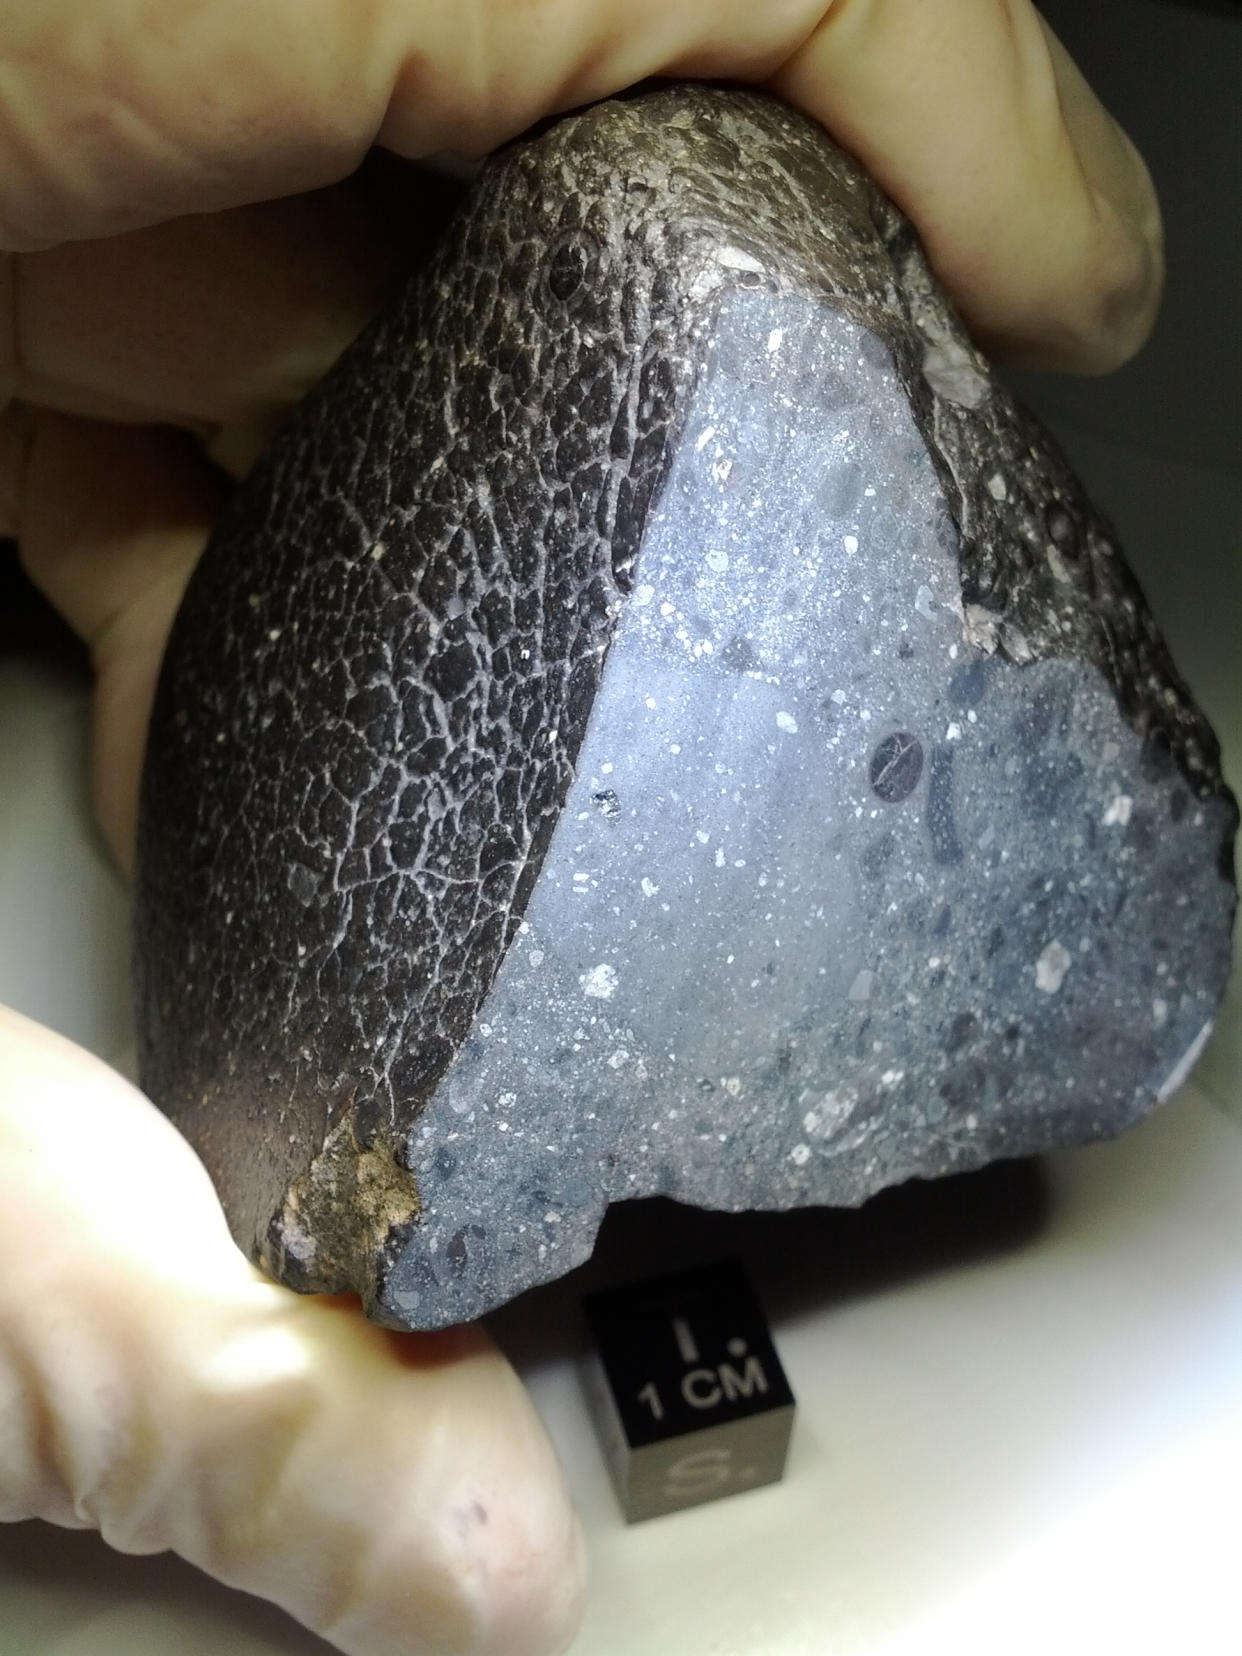 The meteorite is known as 'Black Beauty' and could offer insight into the early Earth (NASA)